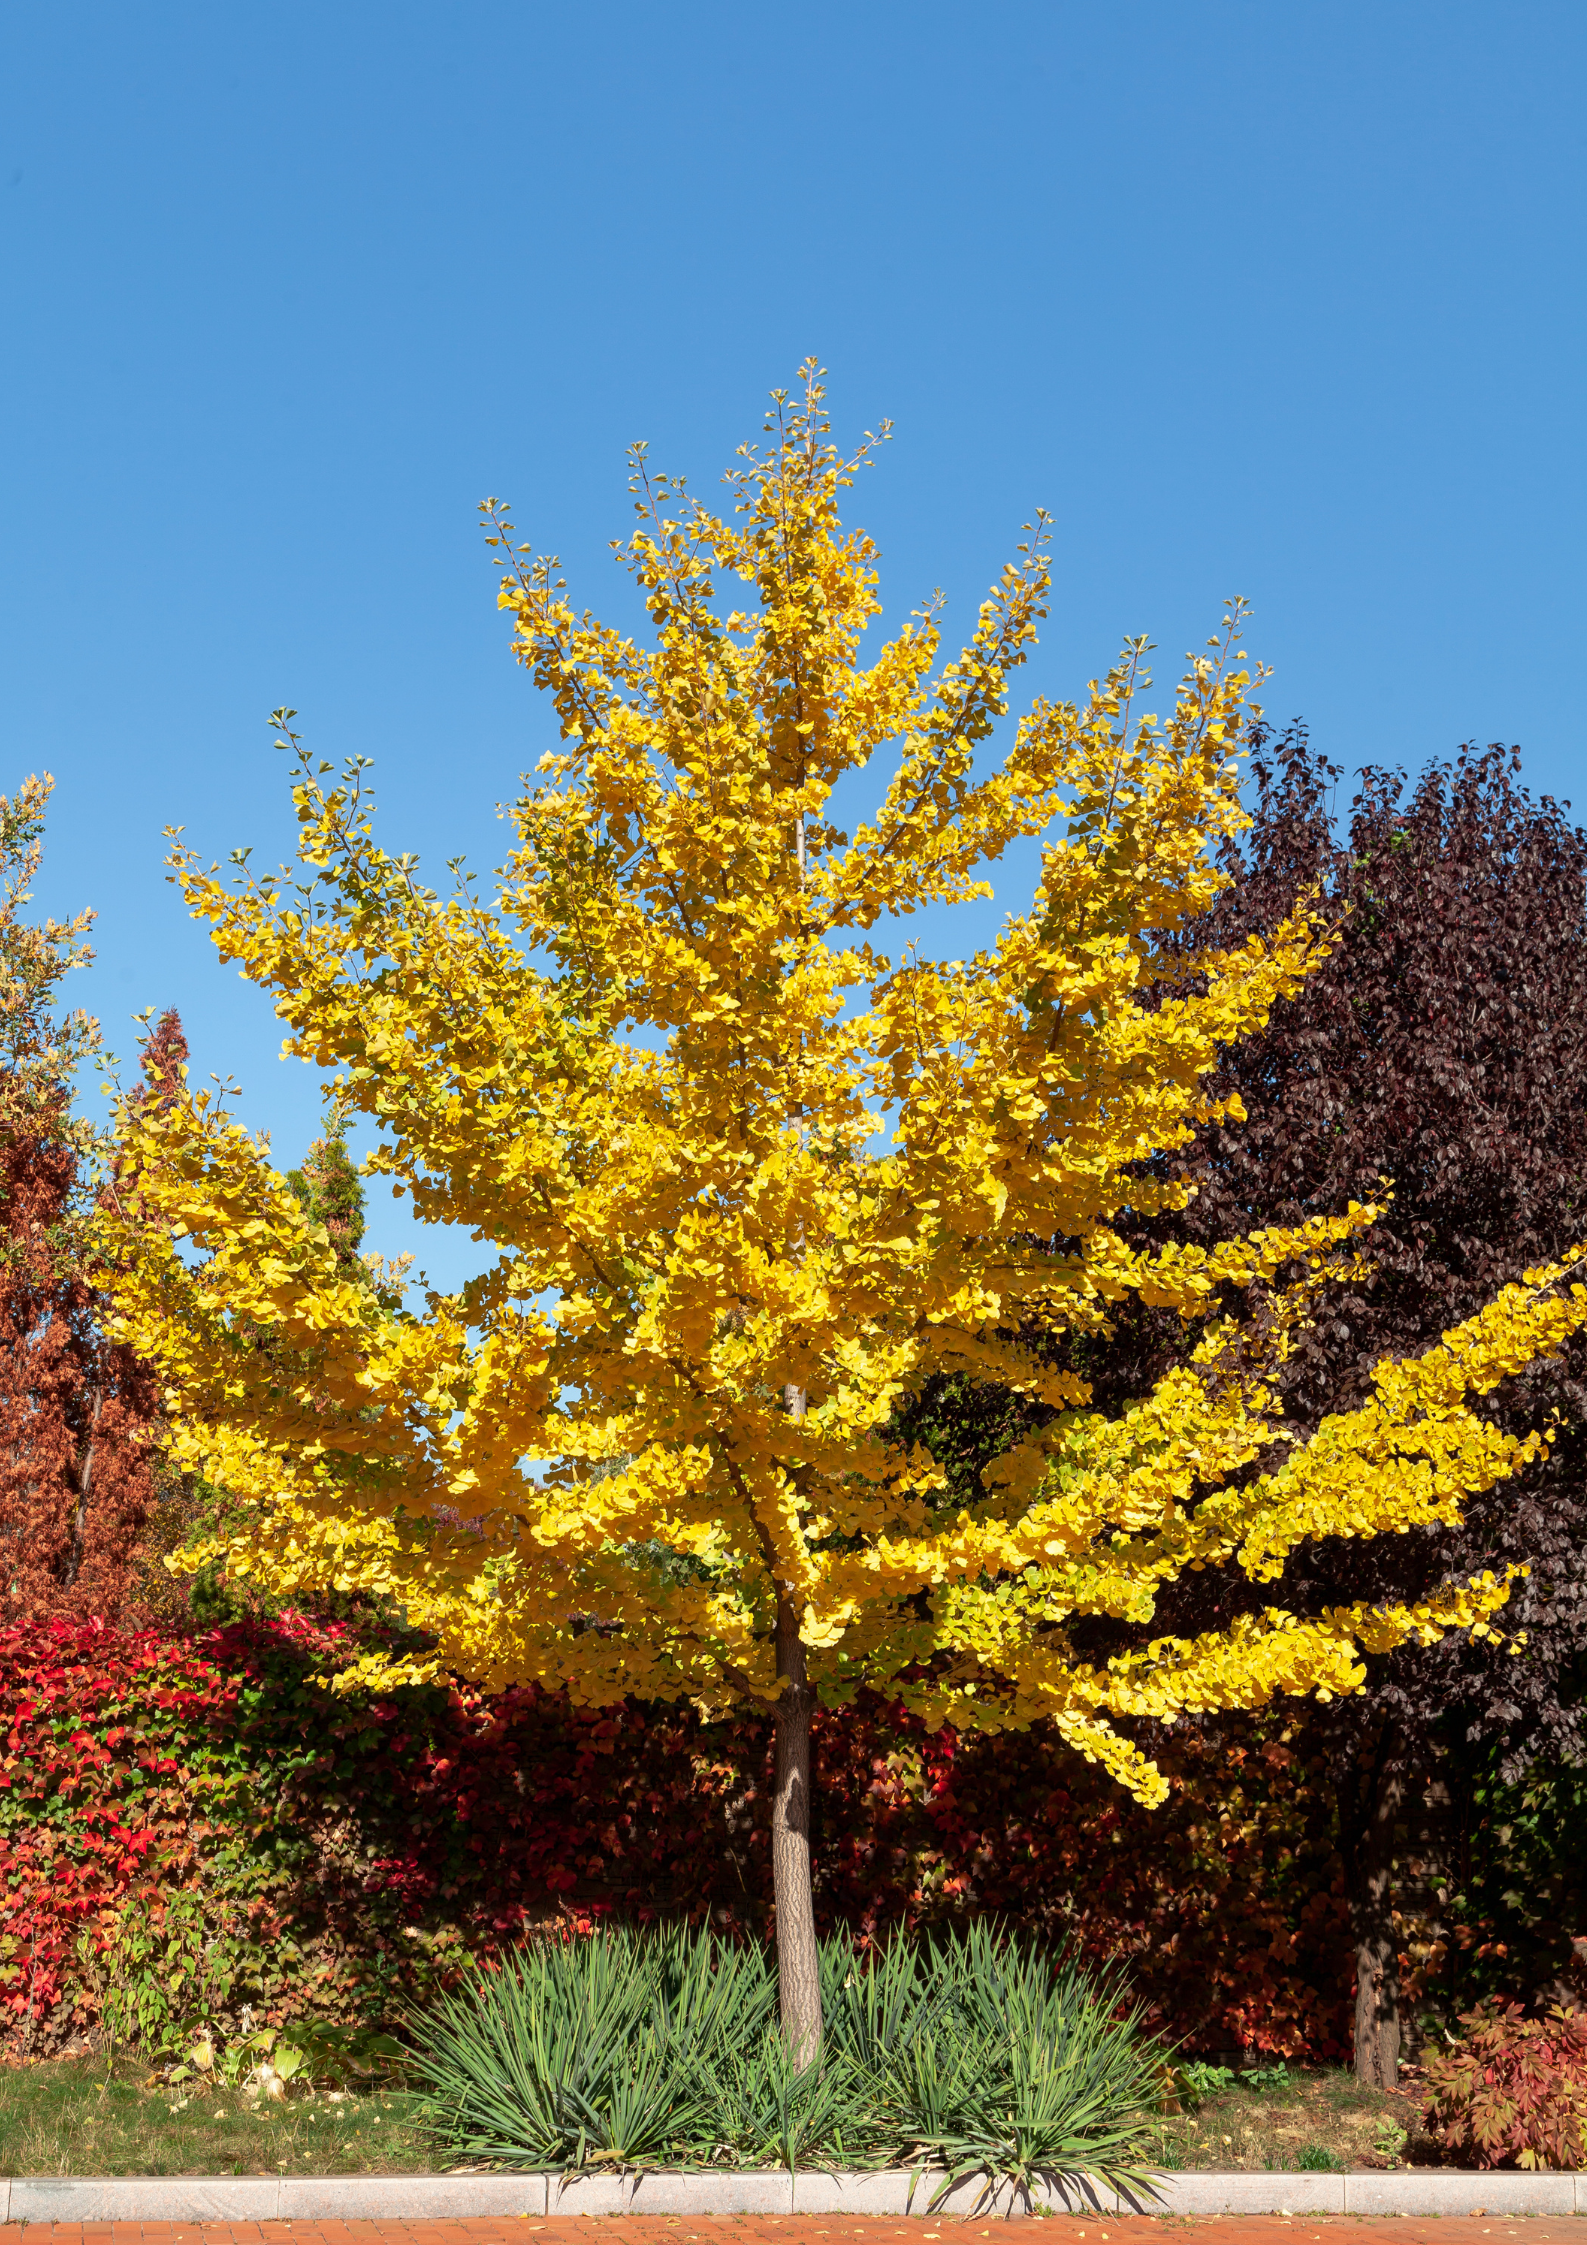 A young maple tree along the side of the road displays a splash of fall colors